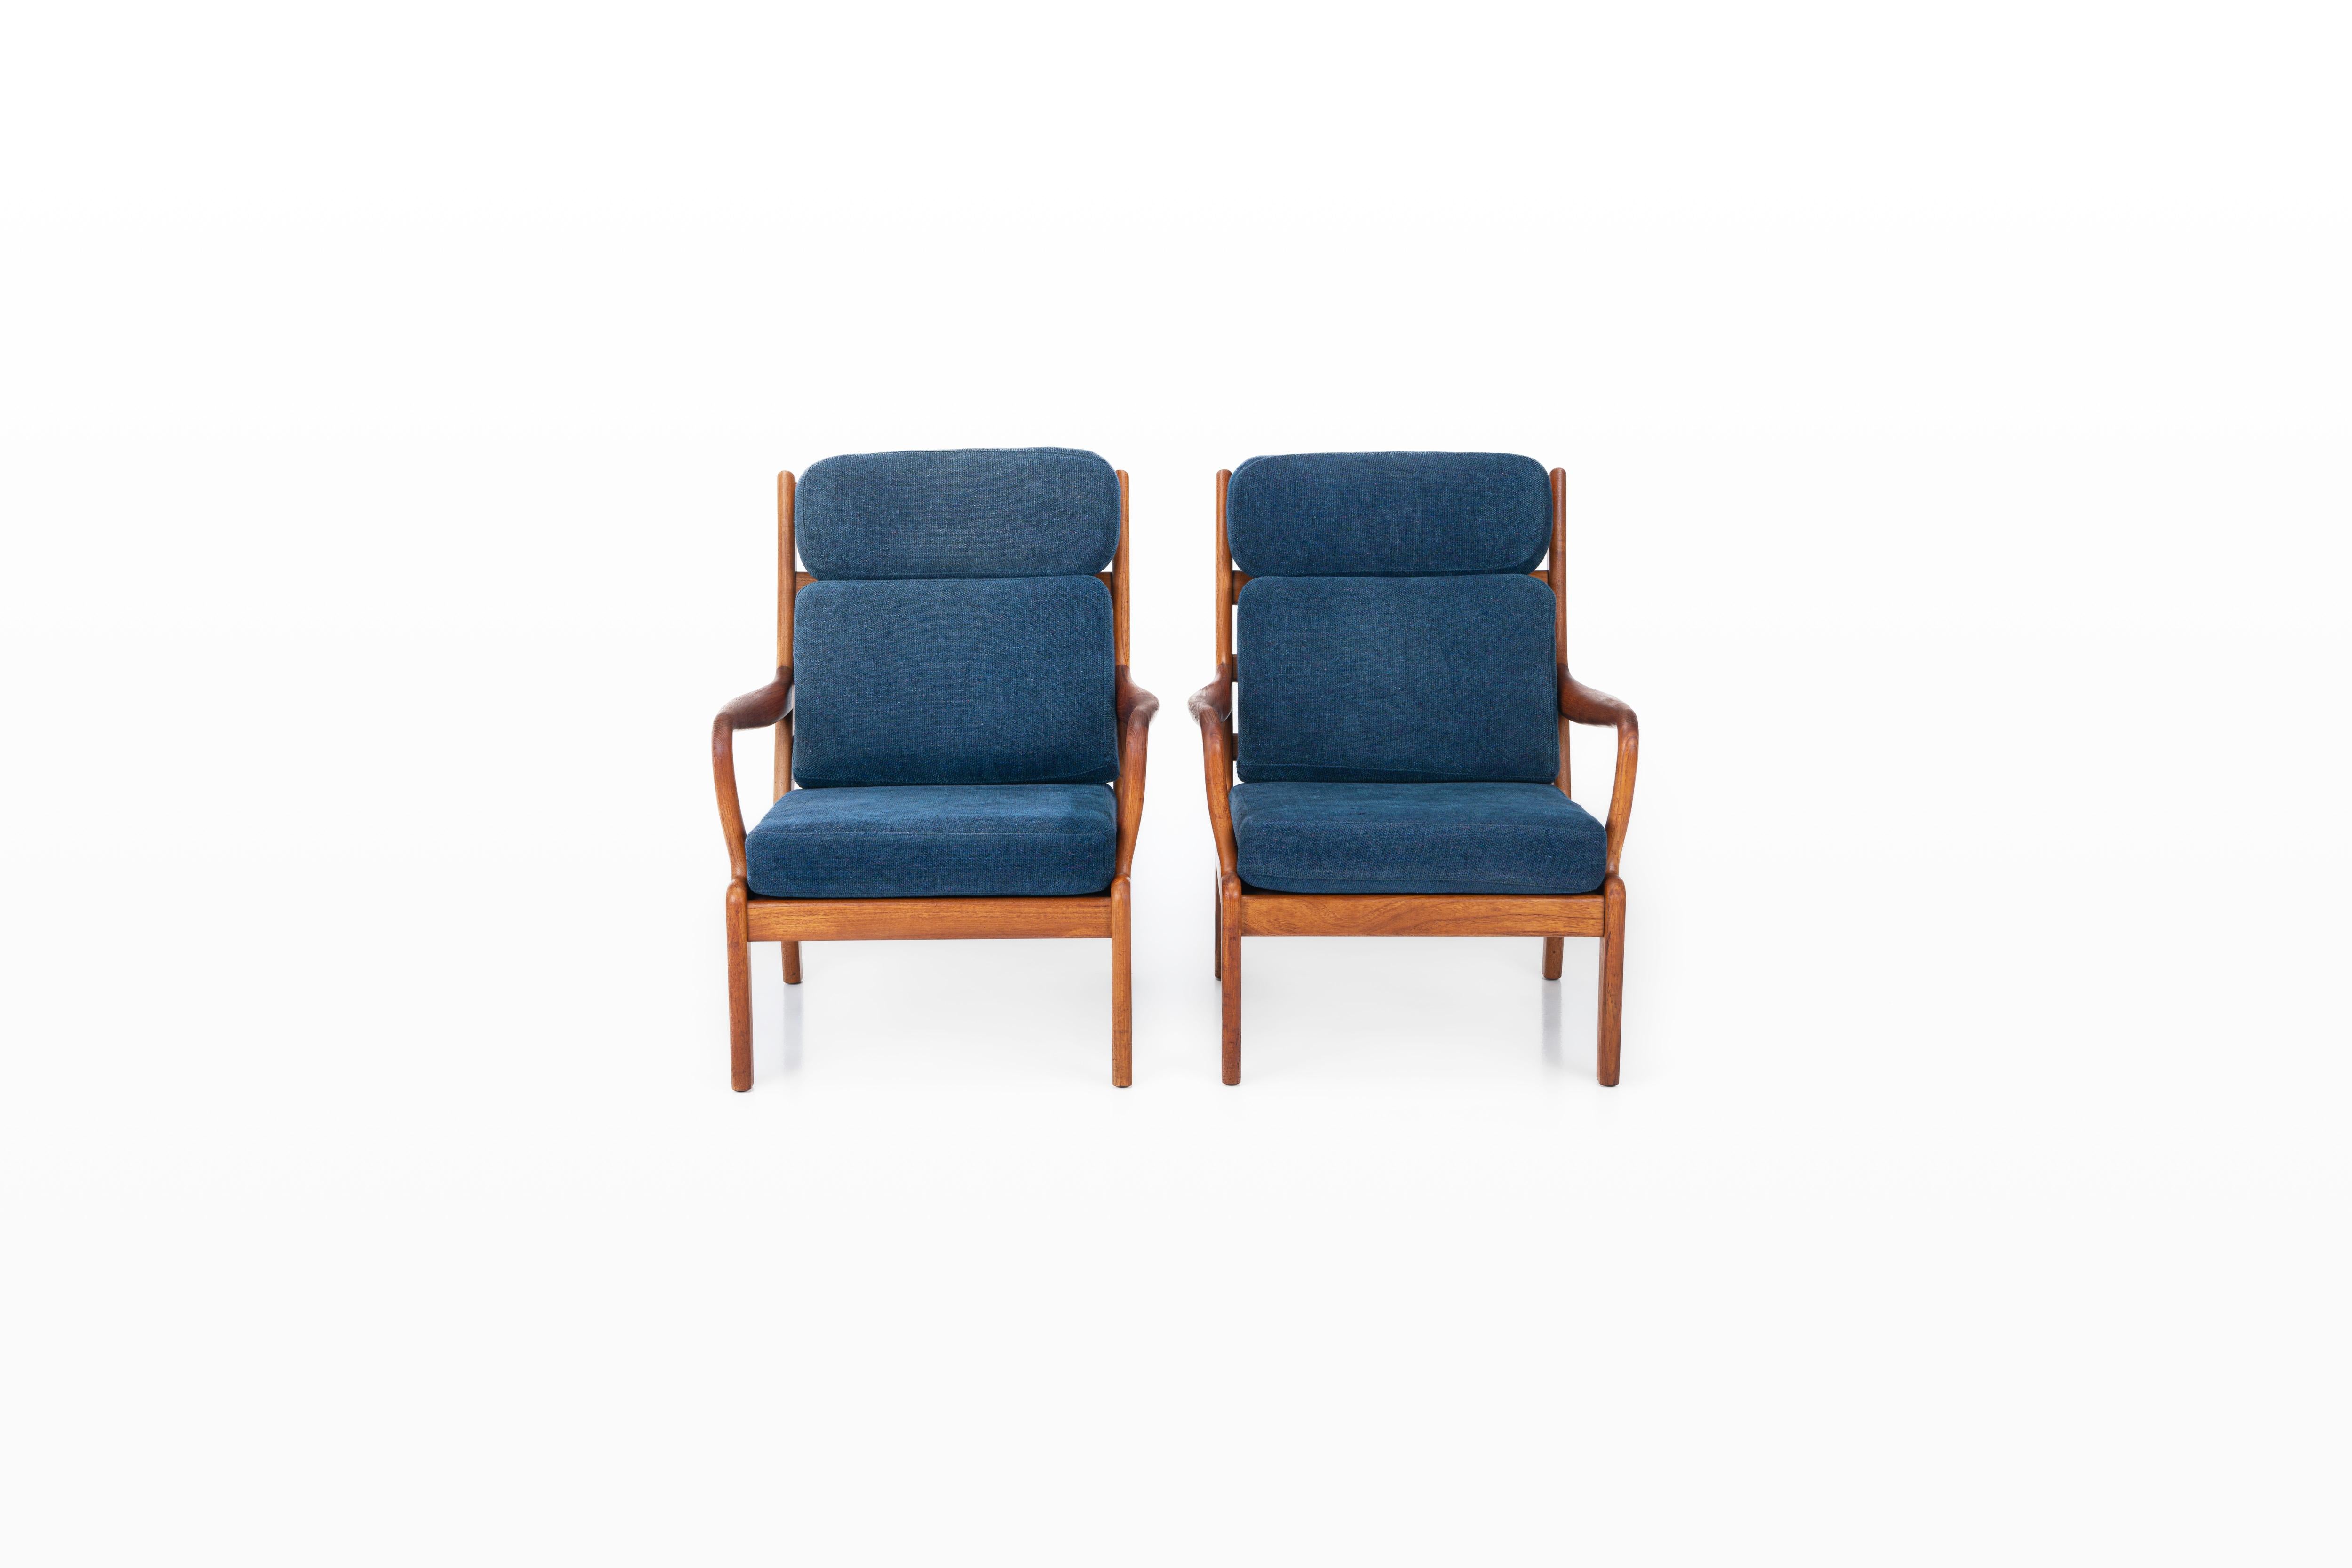 Set of two Scandinavian lounge chairs by L. Olsen & Søn, Denmark 1960s. These lounge chairs have a teak frame, blue upholstery and are in very good condition. The chairs are marked by the producer.

Dimensions:
W: 74 cm
D: 83 cm
H: 99 cm